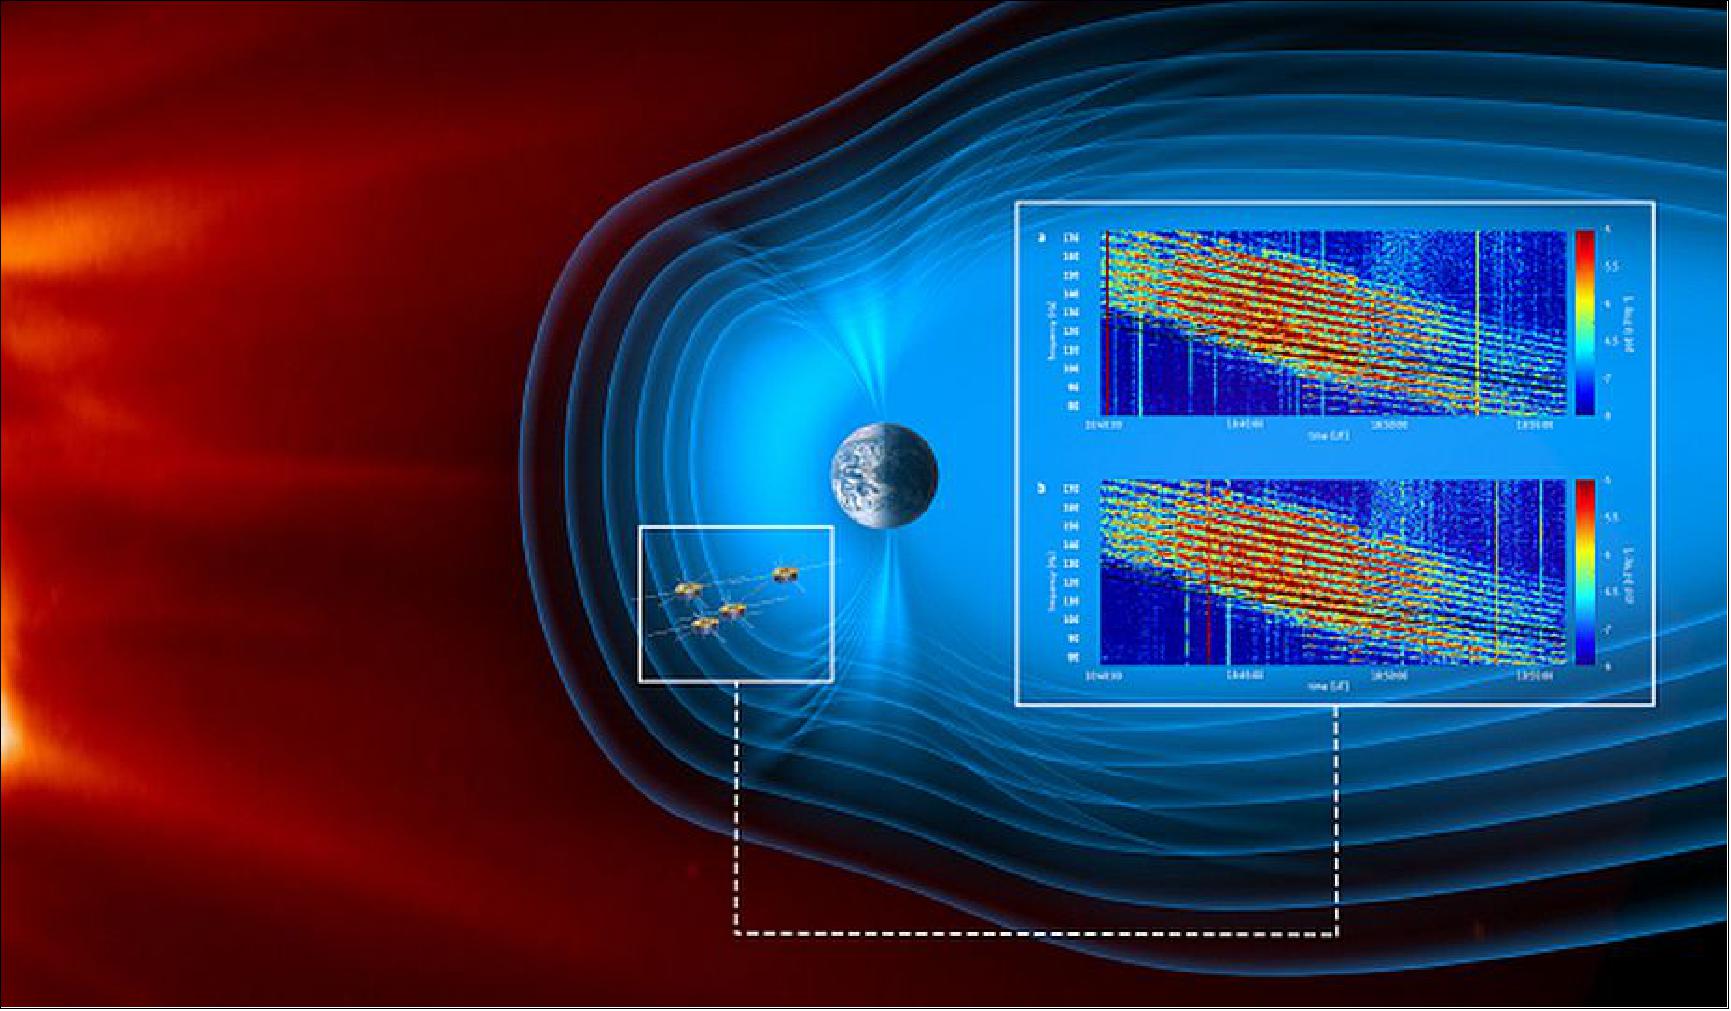 Figure 35: Illustration of the four Cluster spacecraft flying through the Earth's outer radiation belt, close to the geomagnetic equator, where on 6 July 2013, between 18:40 and 18:55 GMT, Cluster observed the type of plasma waves known as equatorial noise (image credit: ESA/ATG medialab)